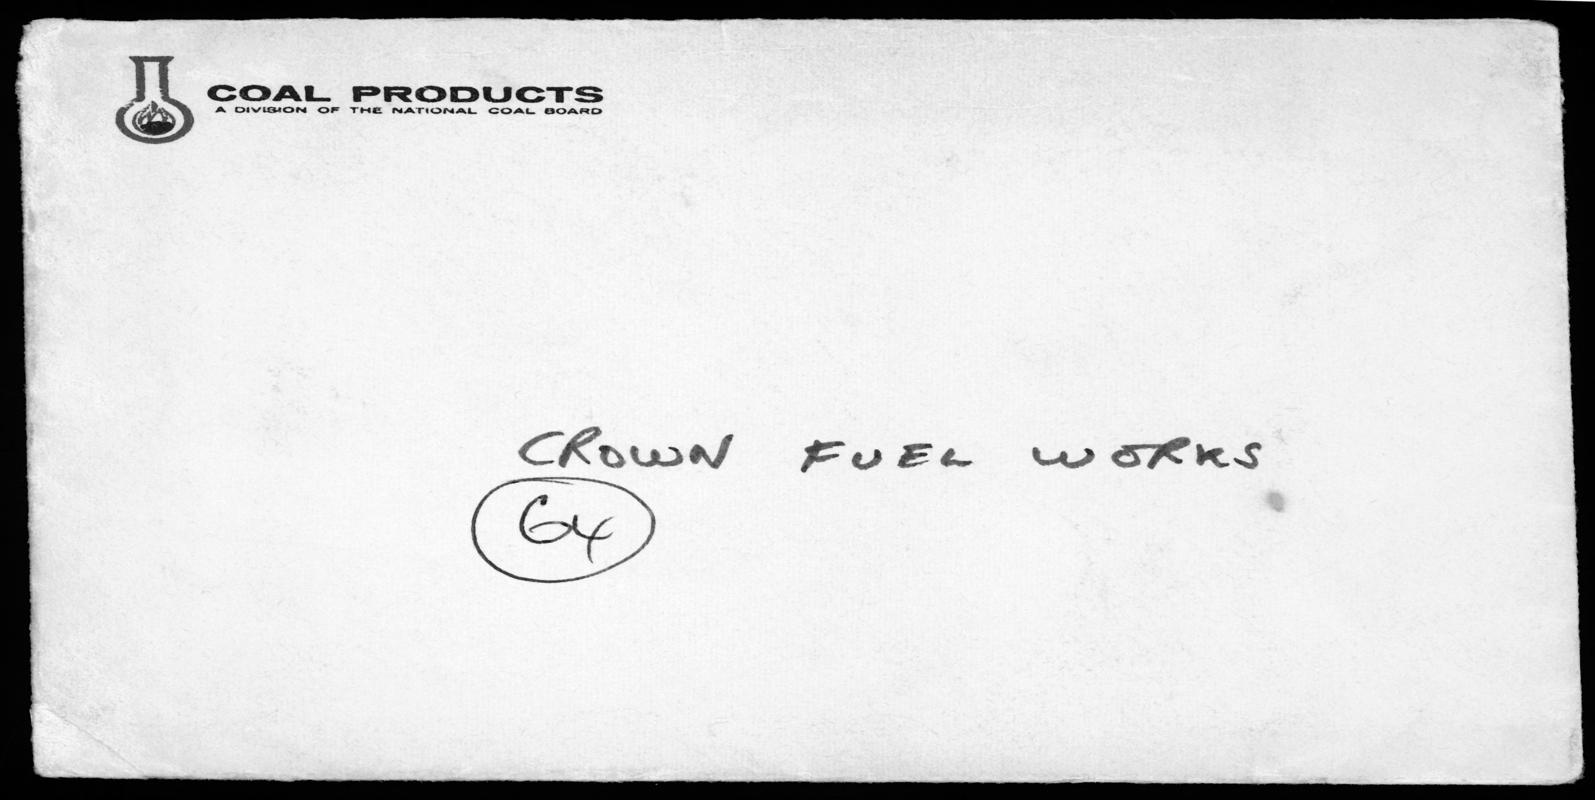 Coal Products' envelope